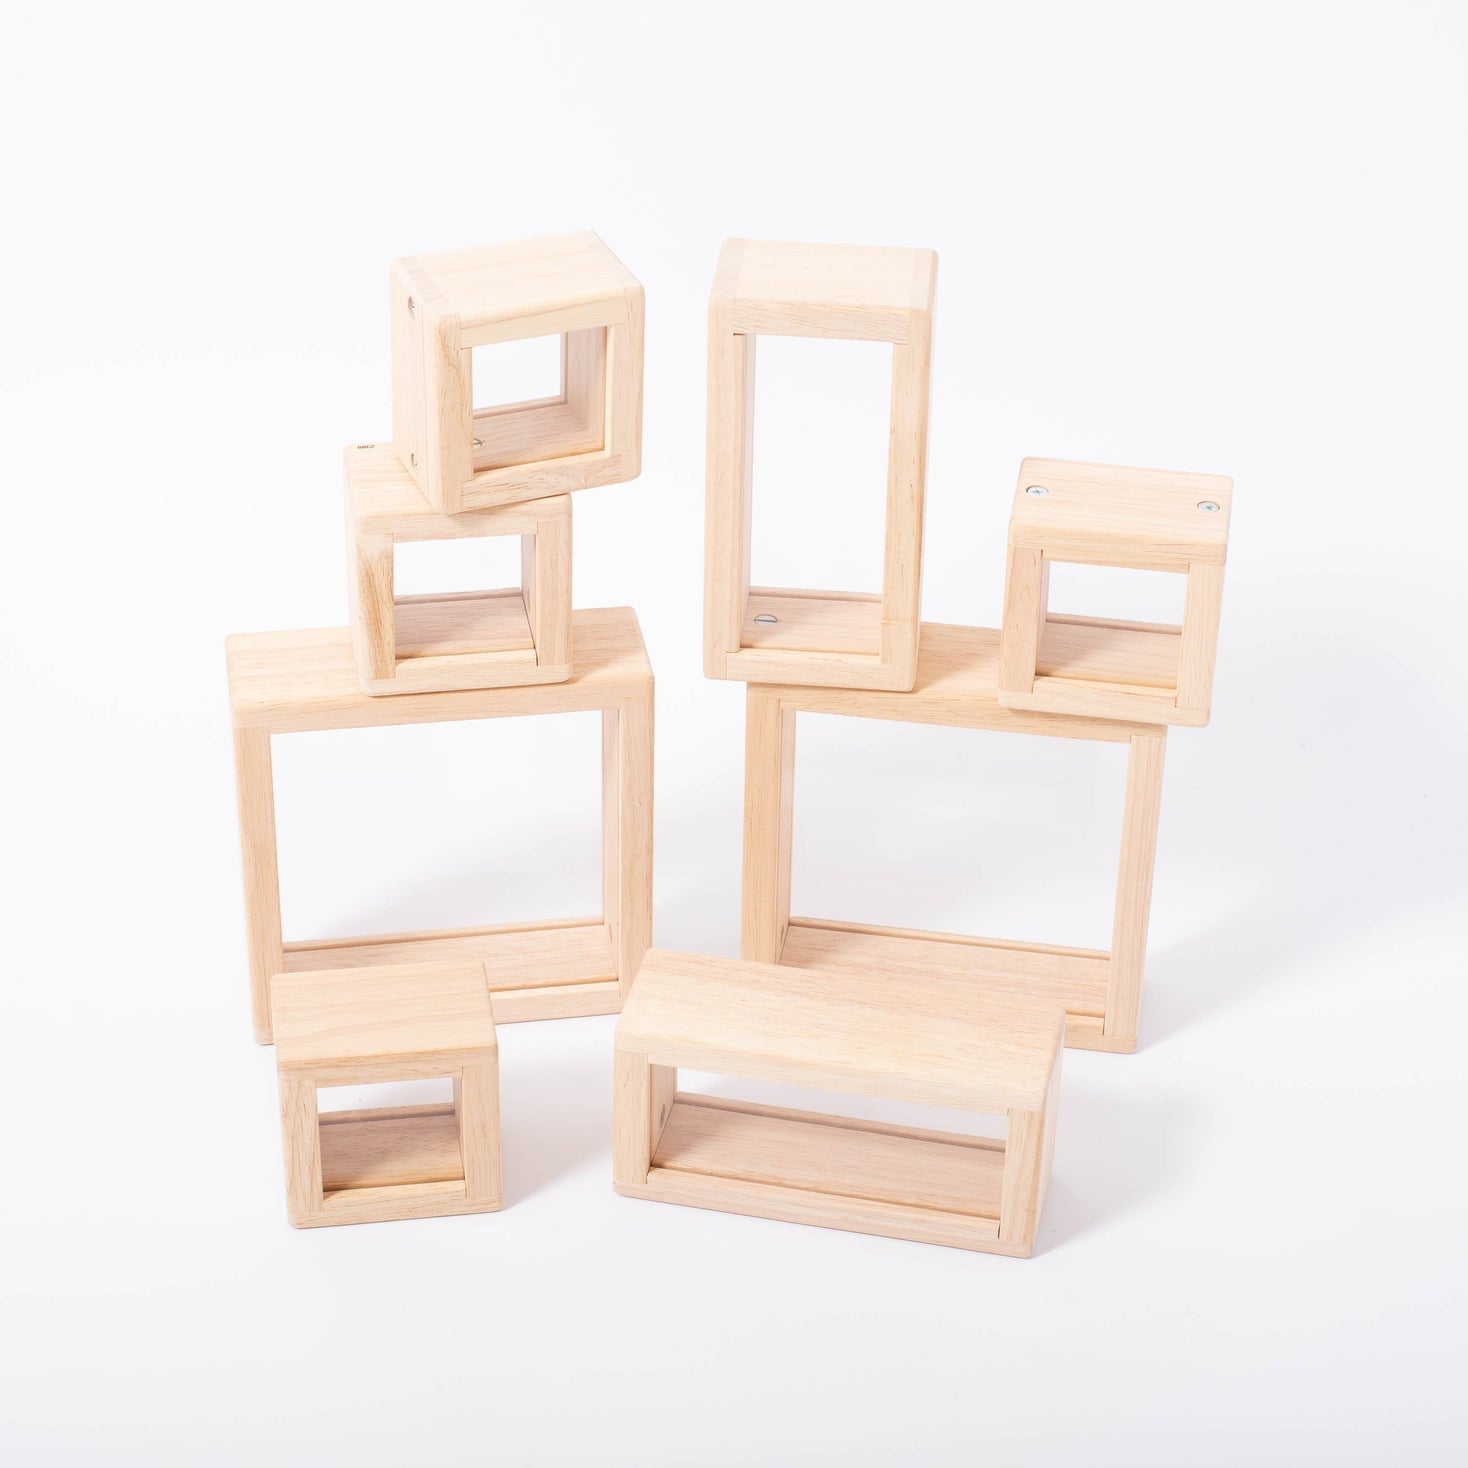 Guidecraft Wooden Treasure Blocks, What can we find today? Collect trinkets, natural materials and sensory objects to place in the beautiful Treasure Blocks. The Guidecraft Wooden Treasure Blocks have smooth hardwood frames with inset, transparent acrylic windows have a removable panel to place small objects to observe or display. Ideal for colour exploration and light table activities. The Guidecraft Wooden Treasure Blocks can hold marbles, beads, twigs, leaves, small toys and so much more. Two screws on t